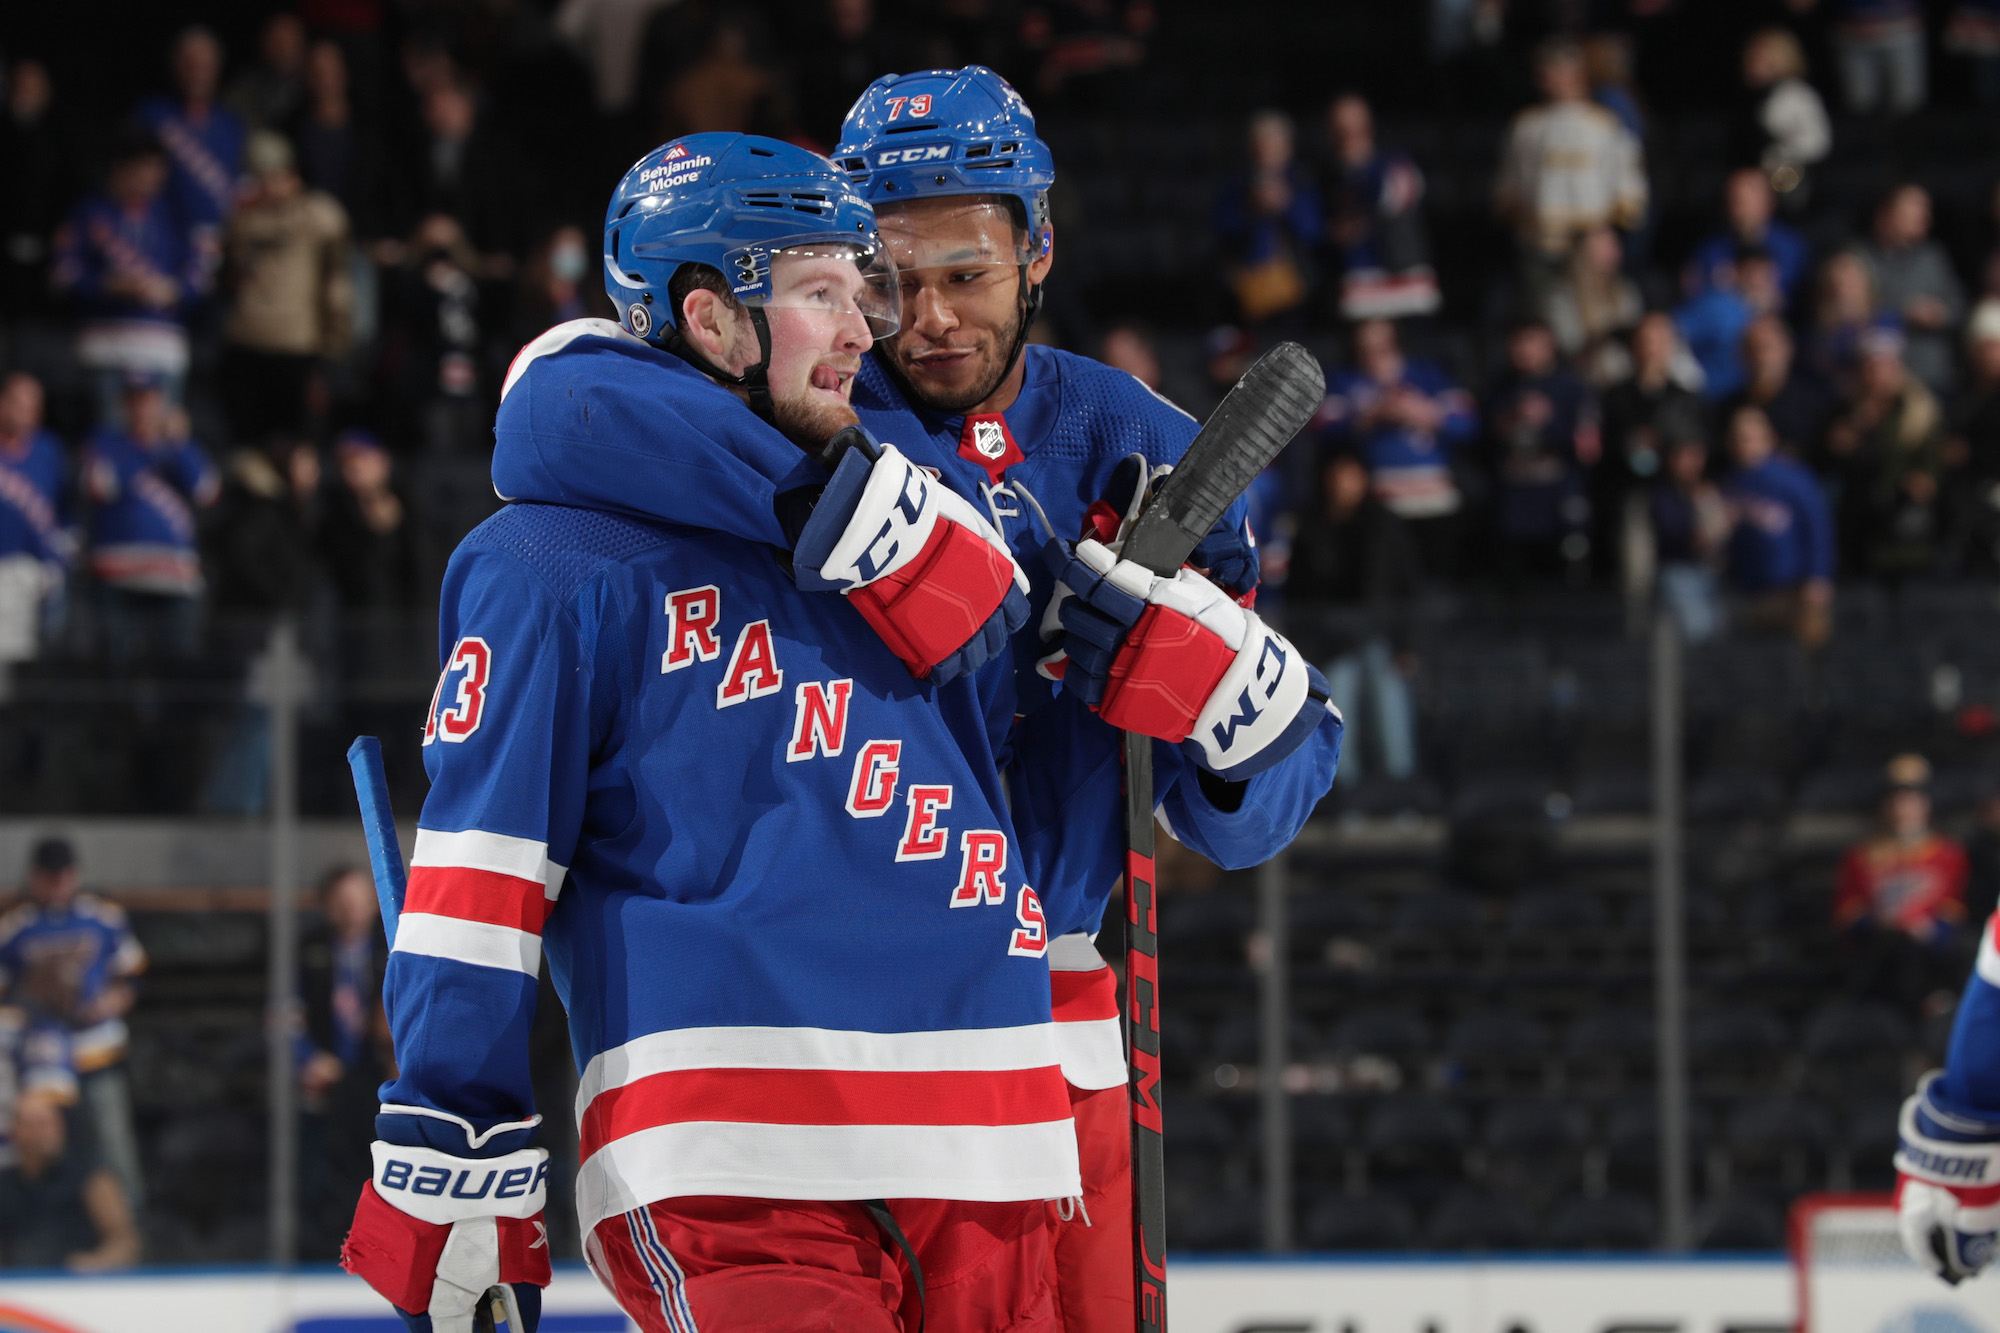 NEW YORK, NY - MARCH 02: K'Andre Miller #79 and Alexis Lafreniere #13 of the New York Rangers celebrate after a 5-3 win against the St Louis Blues at Madison Square Garden on March 2, 2022 in New York City. (Photo by Jared Silber/NHLI via Getty Images)